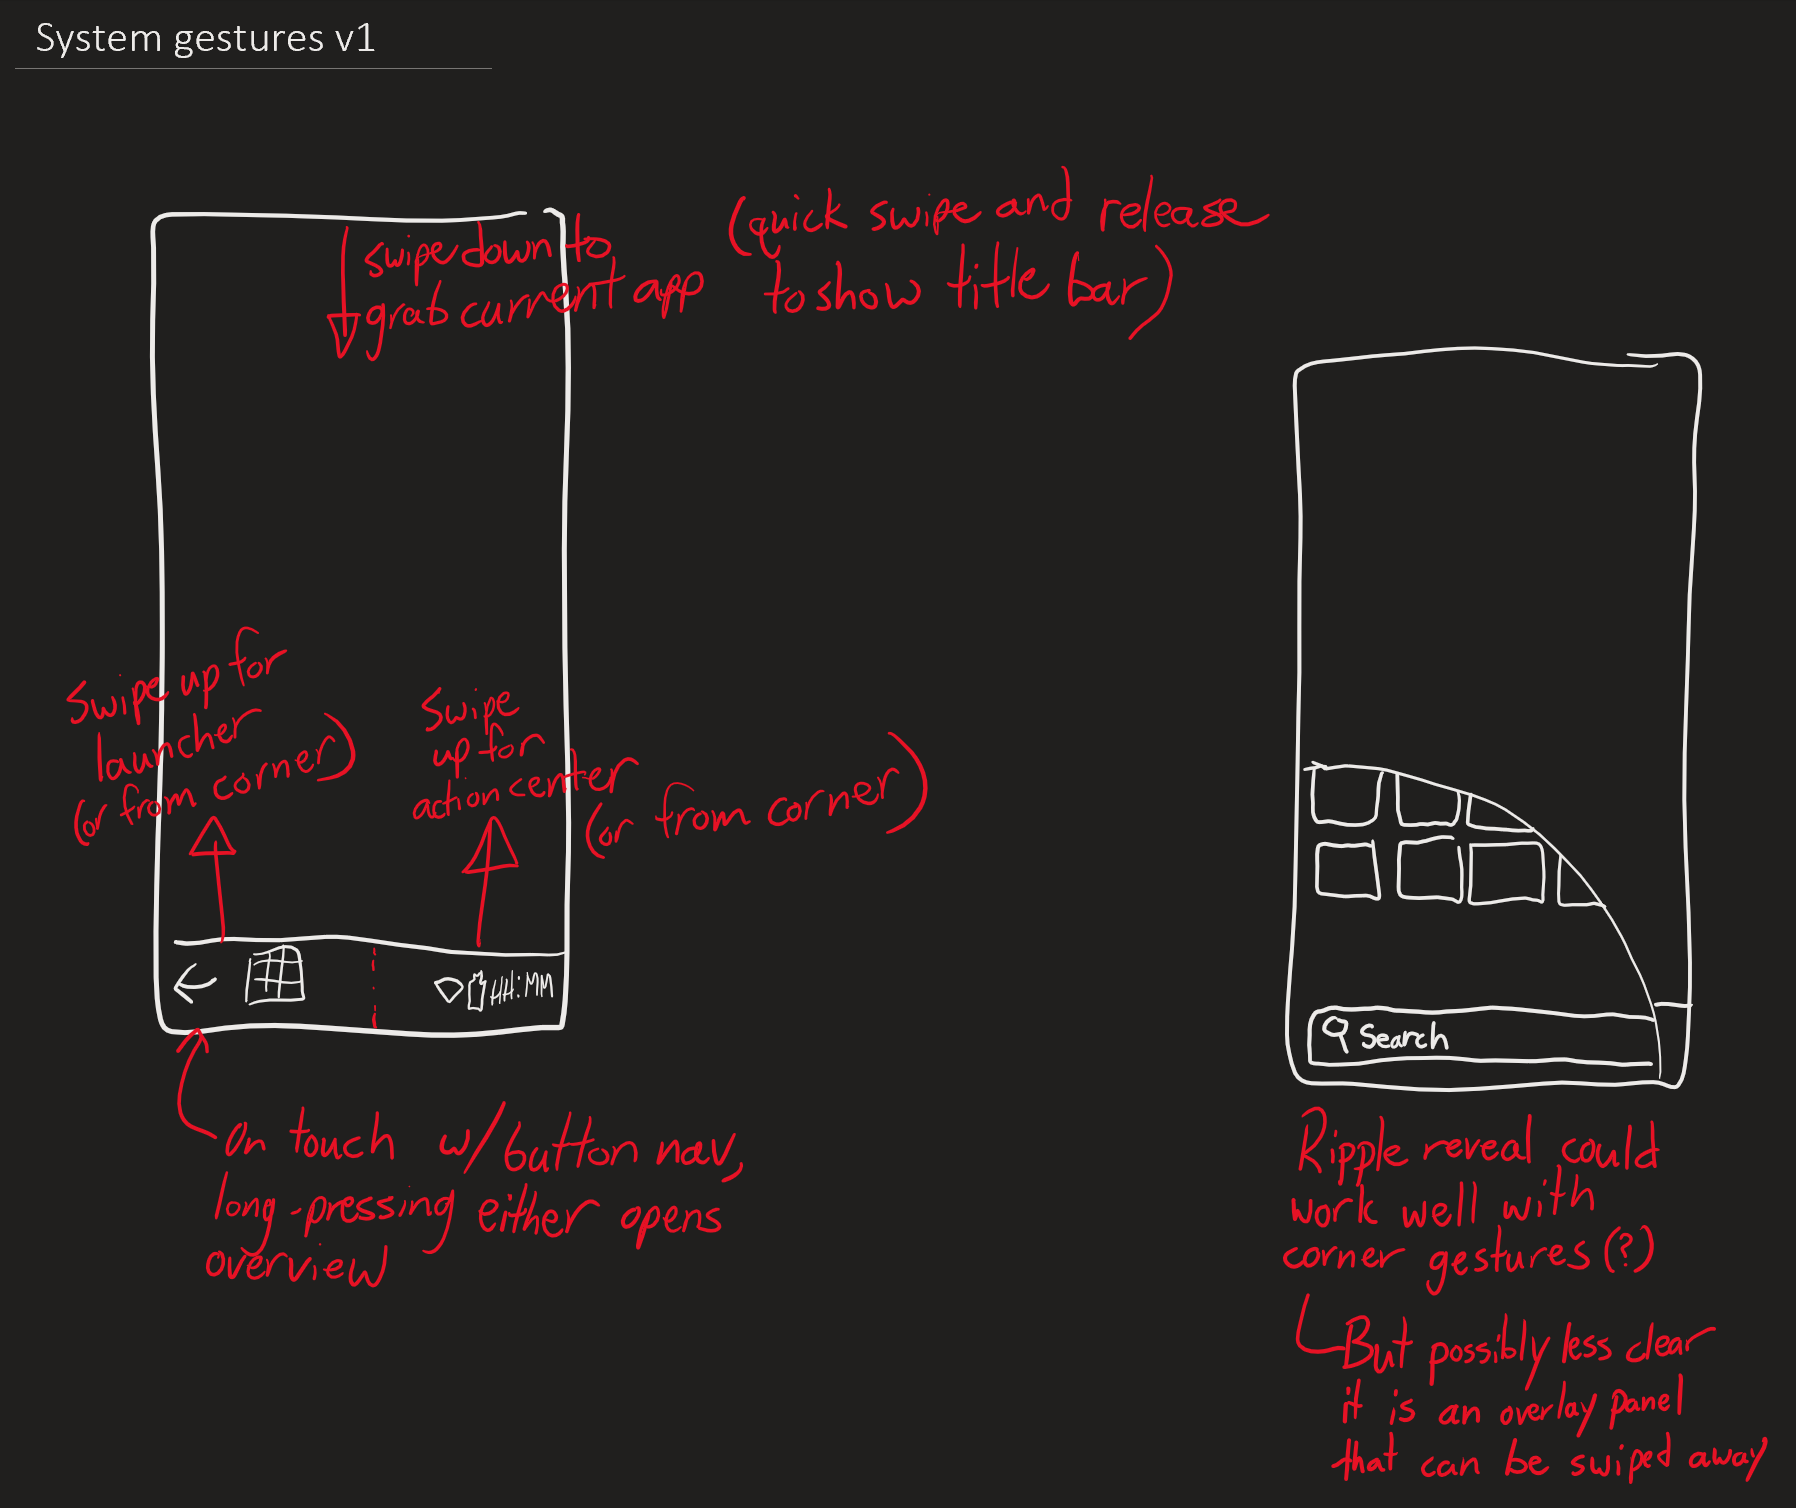 A sketch titled, System gestures v1.  Swipe down to grab current app.  Quick swipe and release to show title bar.  Swipe up on the bottom-left for launcher.  Swipe up from bottom-right for action center.  The bottom bar has back and app launcher buttons on the left and system icons and clock on the right.